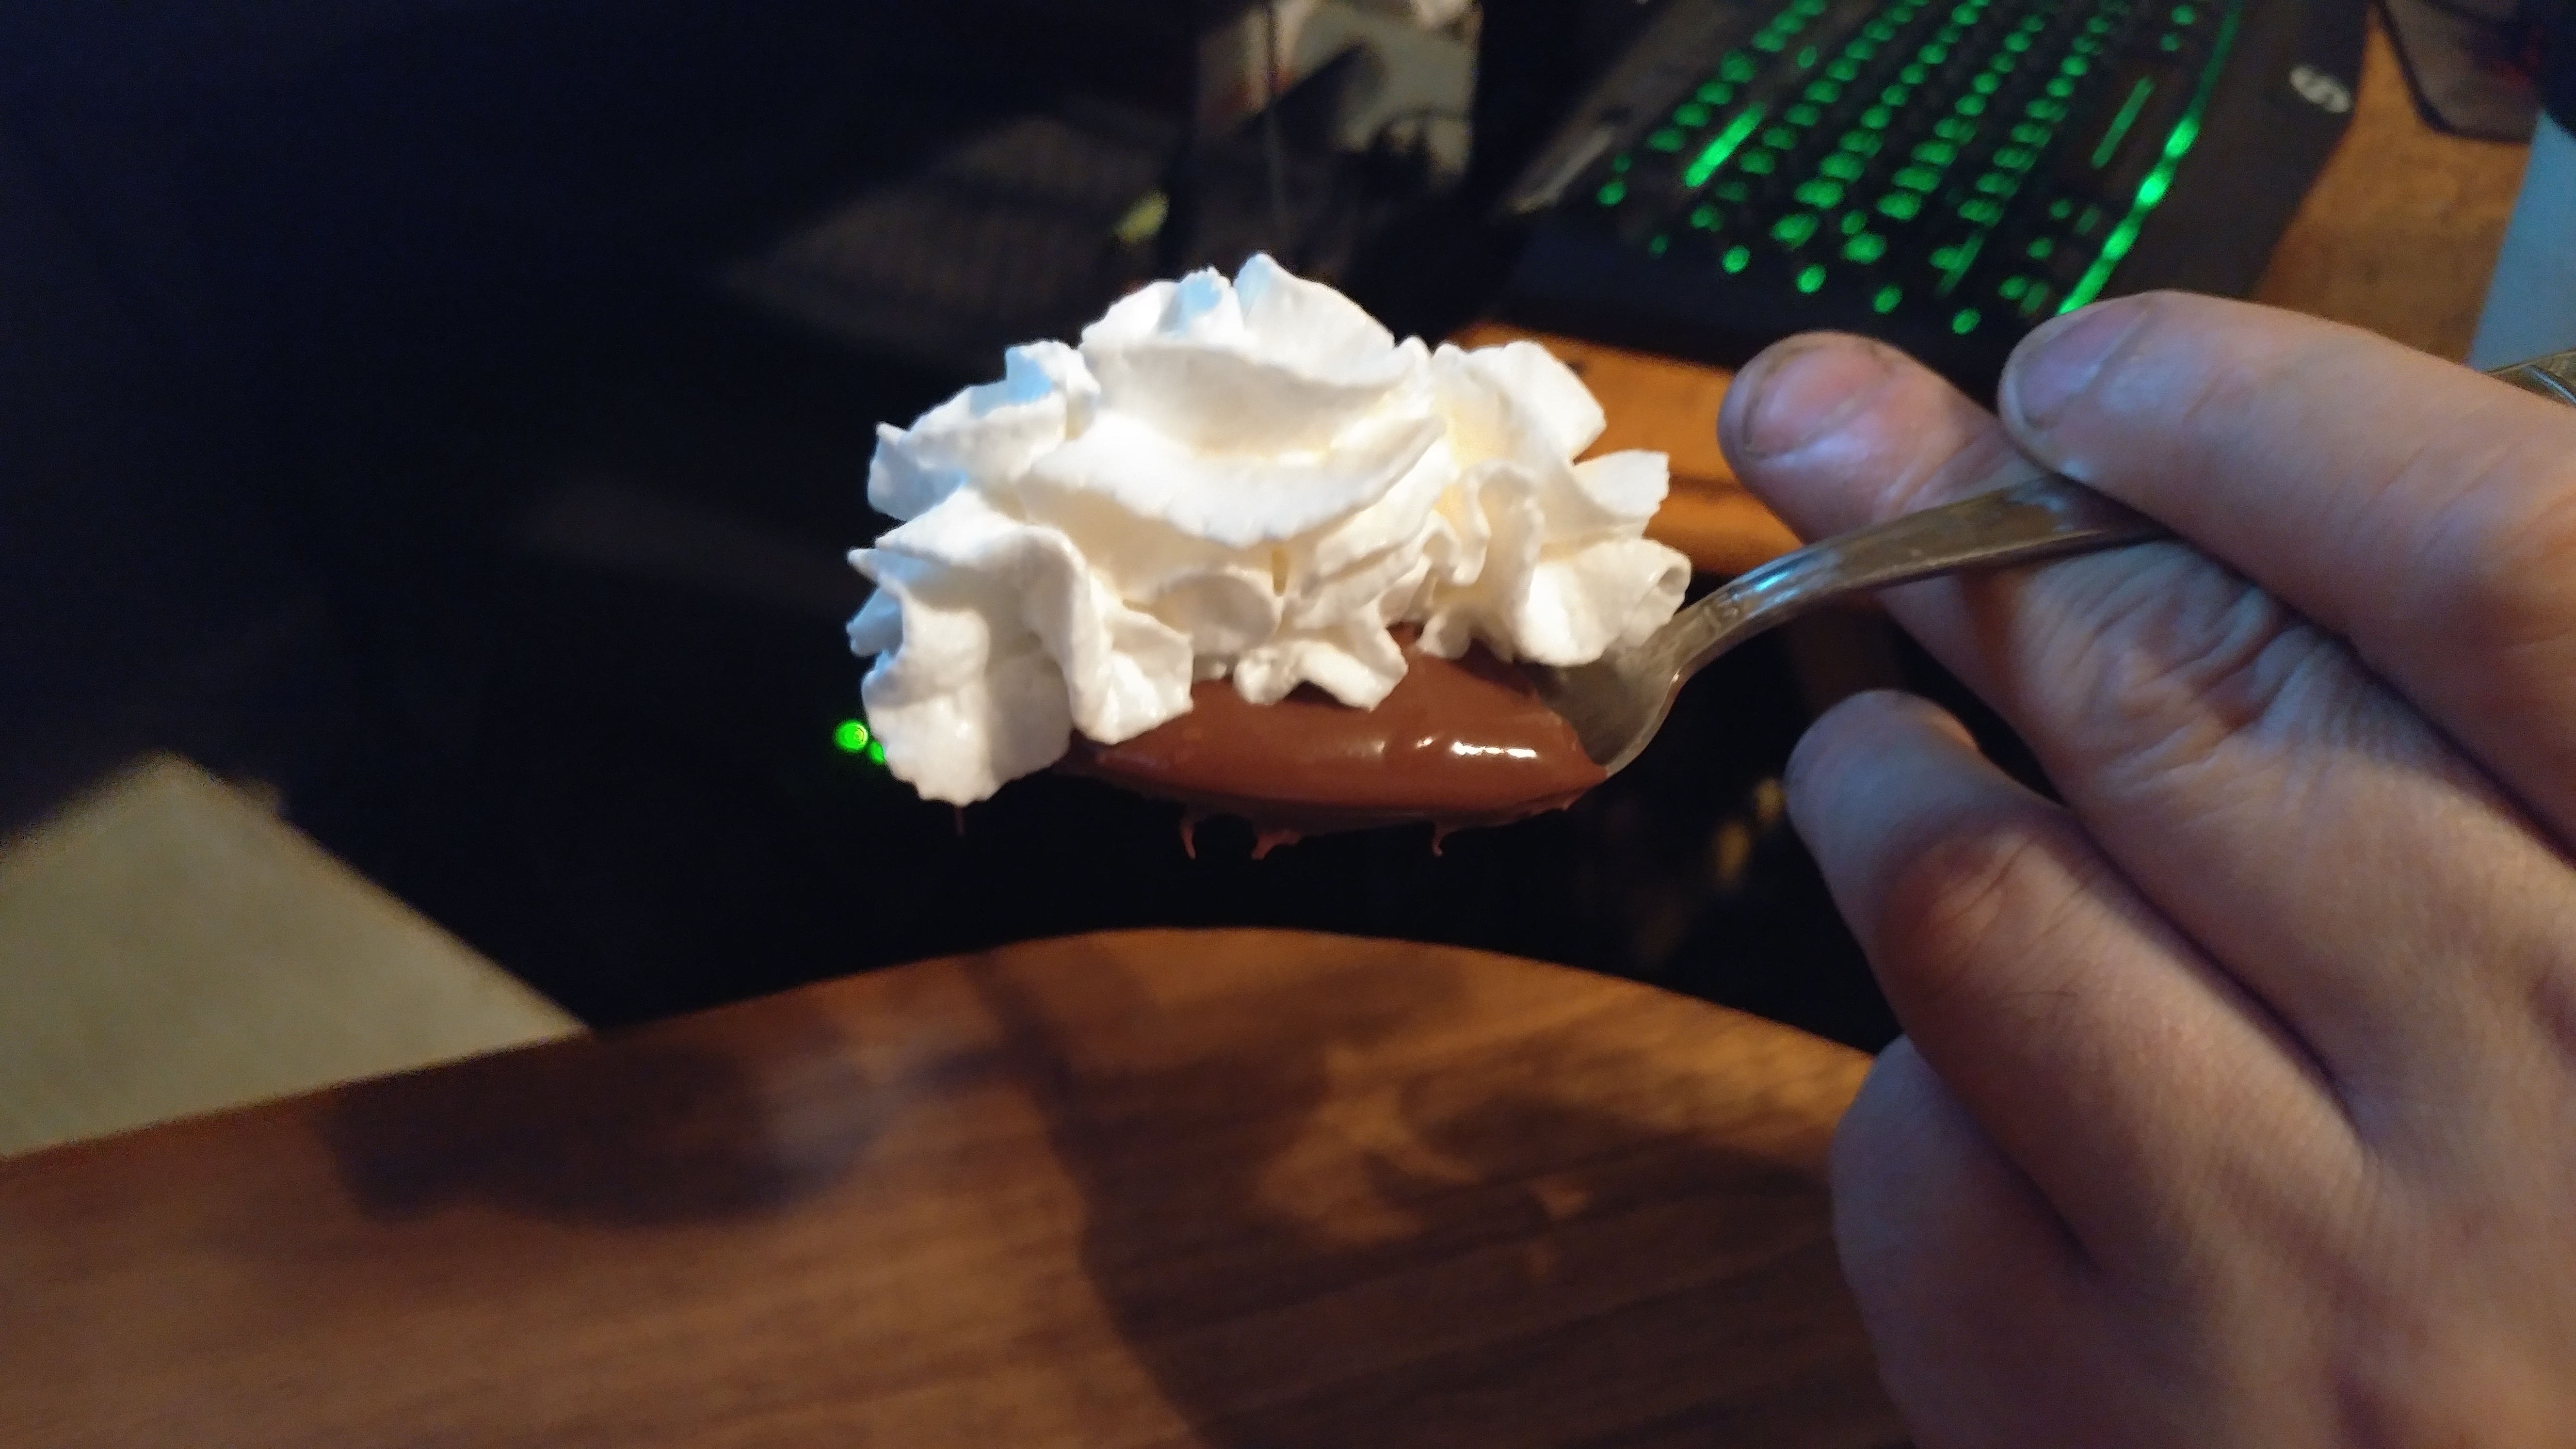 A spoon full of Nutella and Whipped Cream